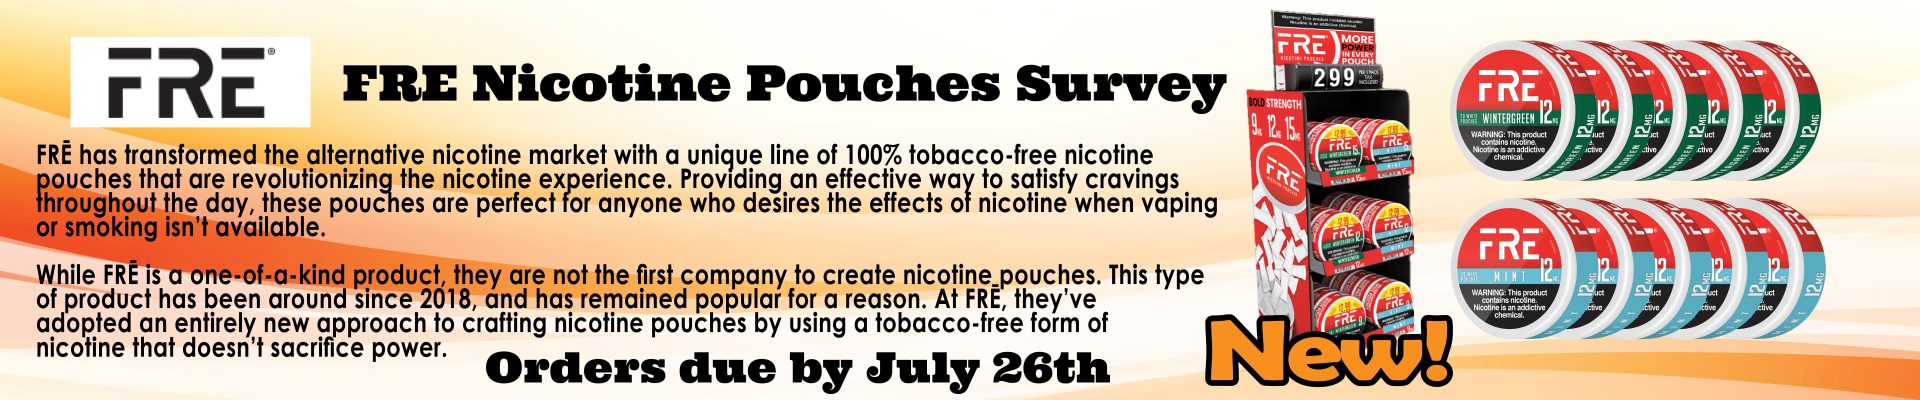 FRE Nicotine Pouches